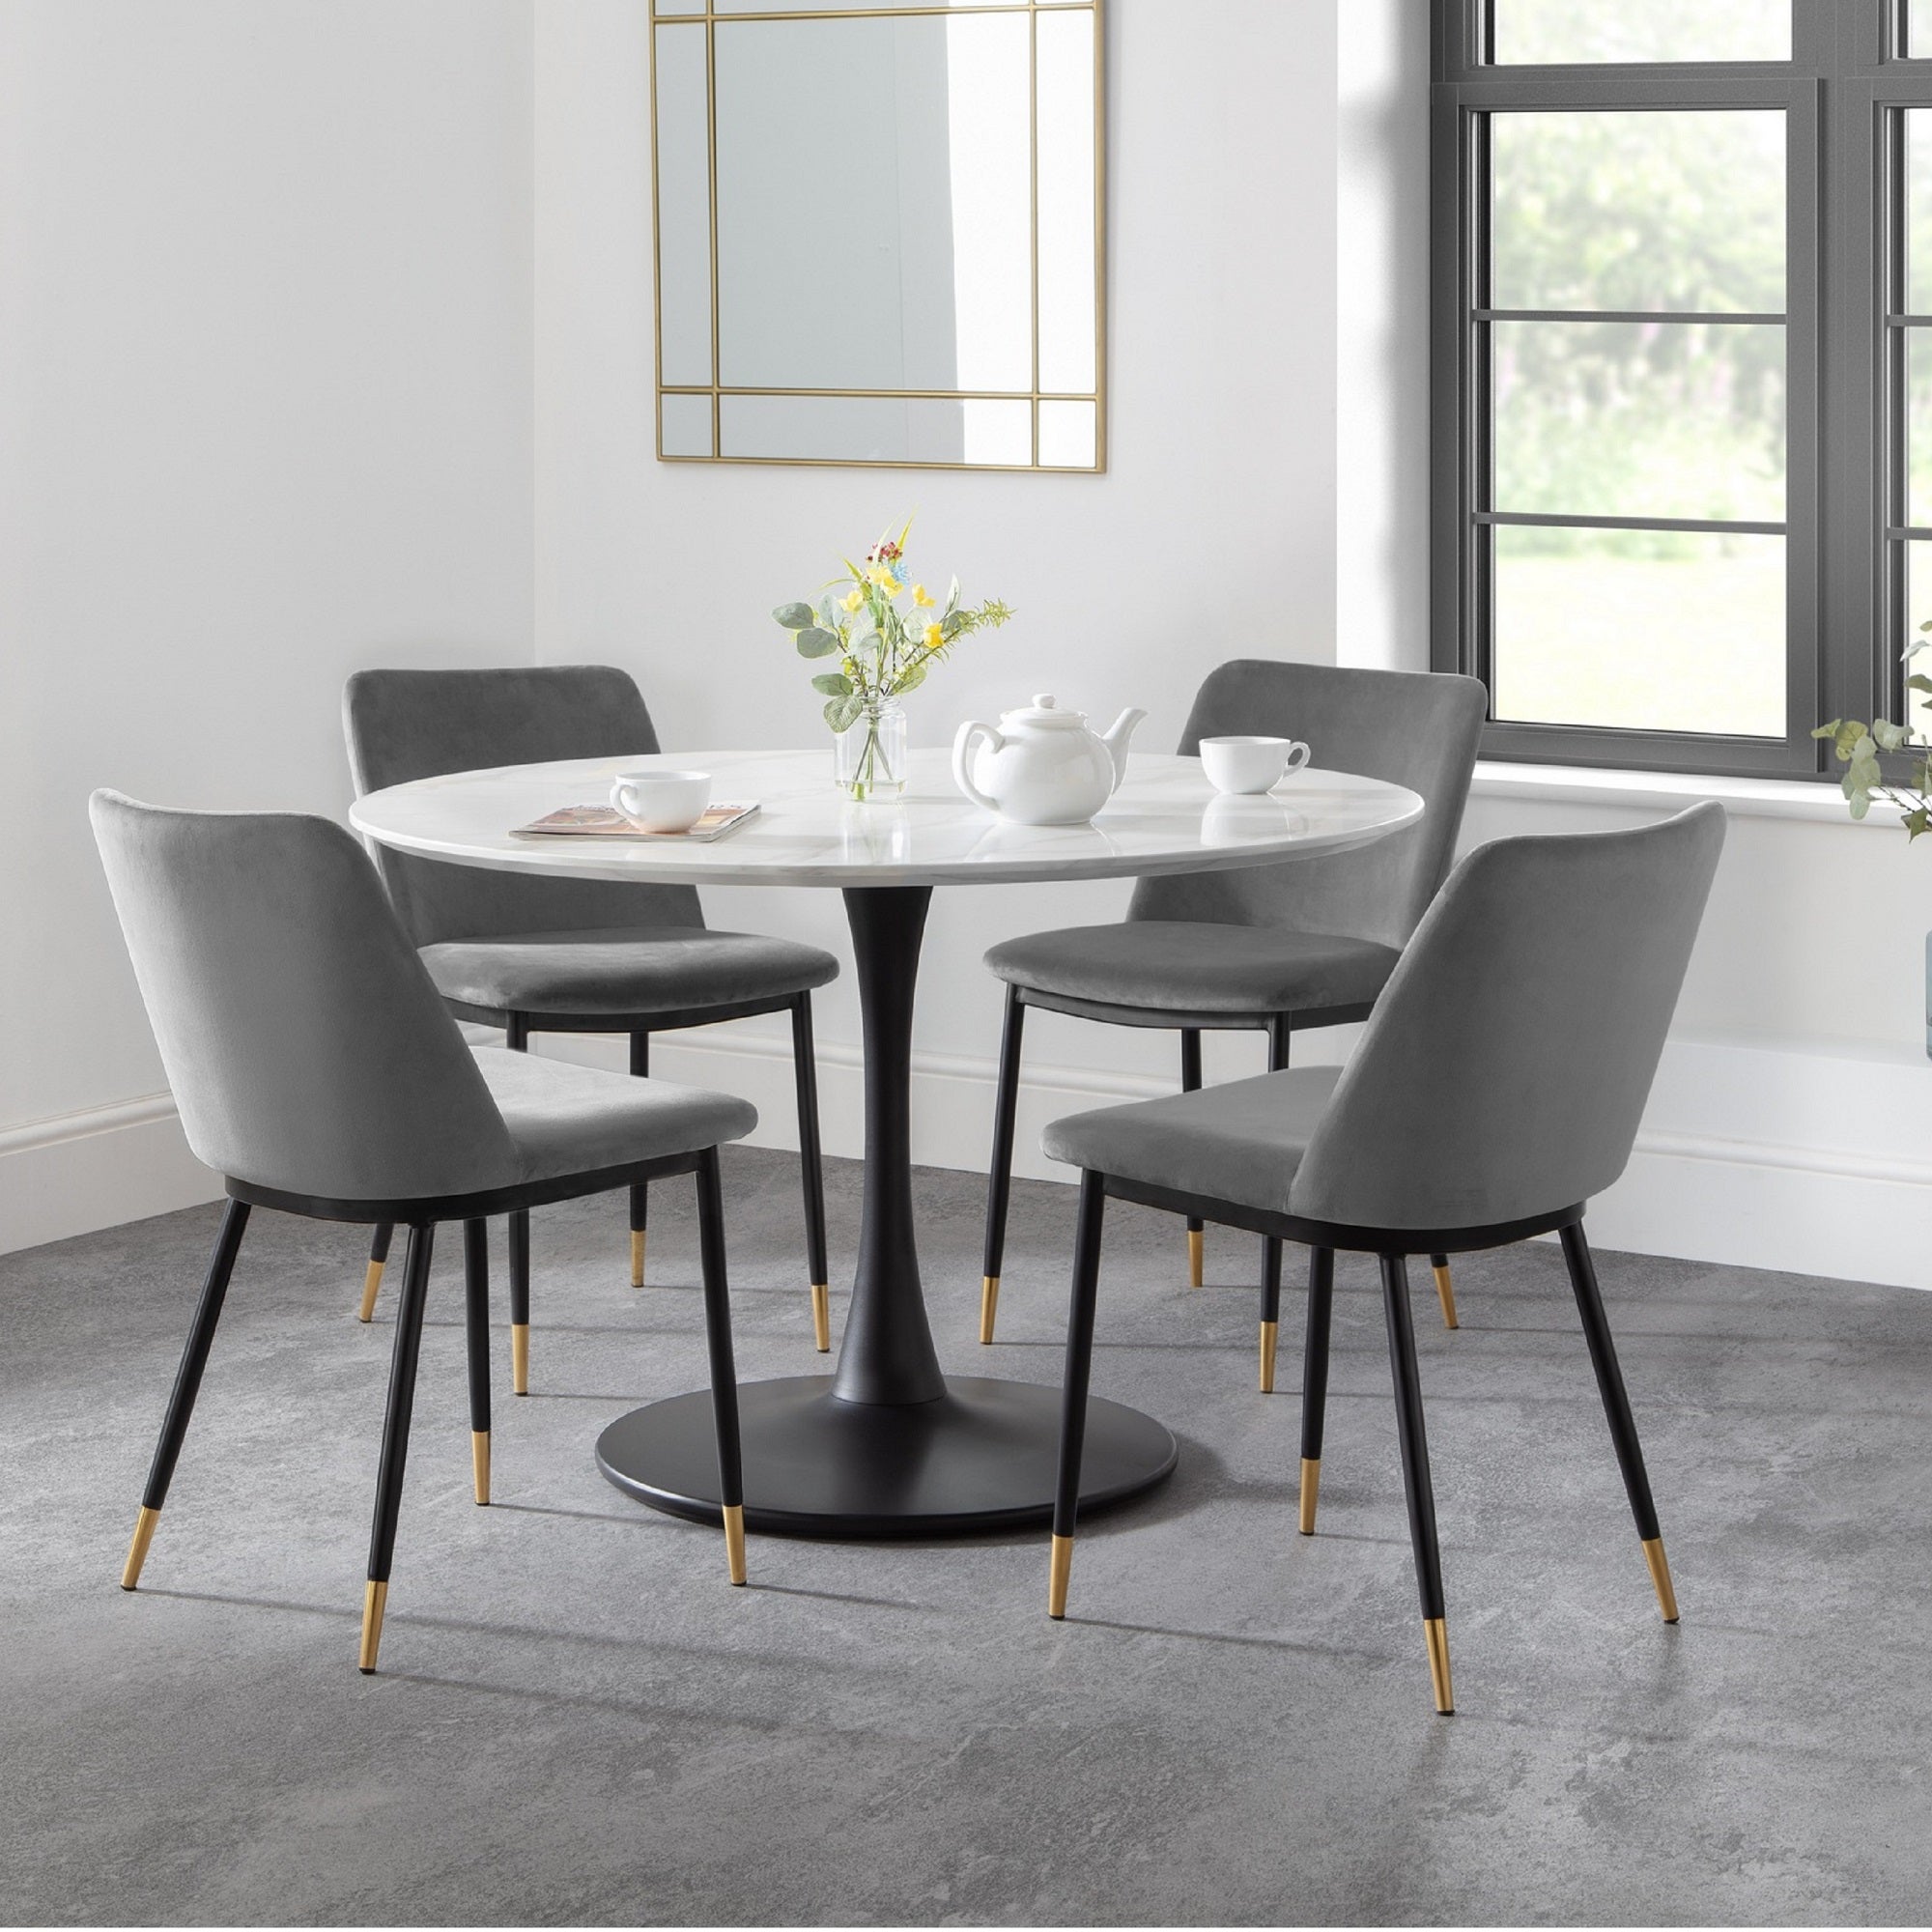 Holland Round Pedestal Dining Table With 4 Delaunay Chairs Grey